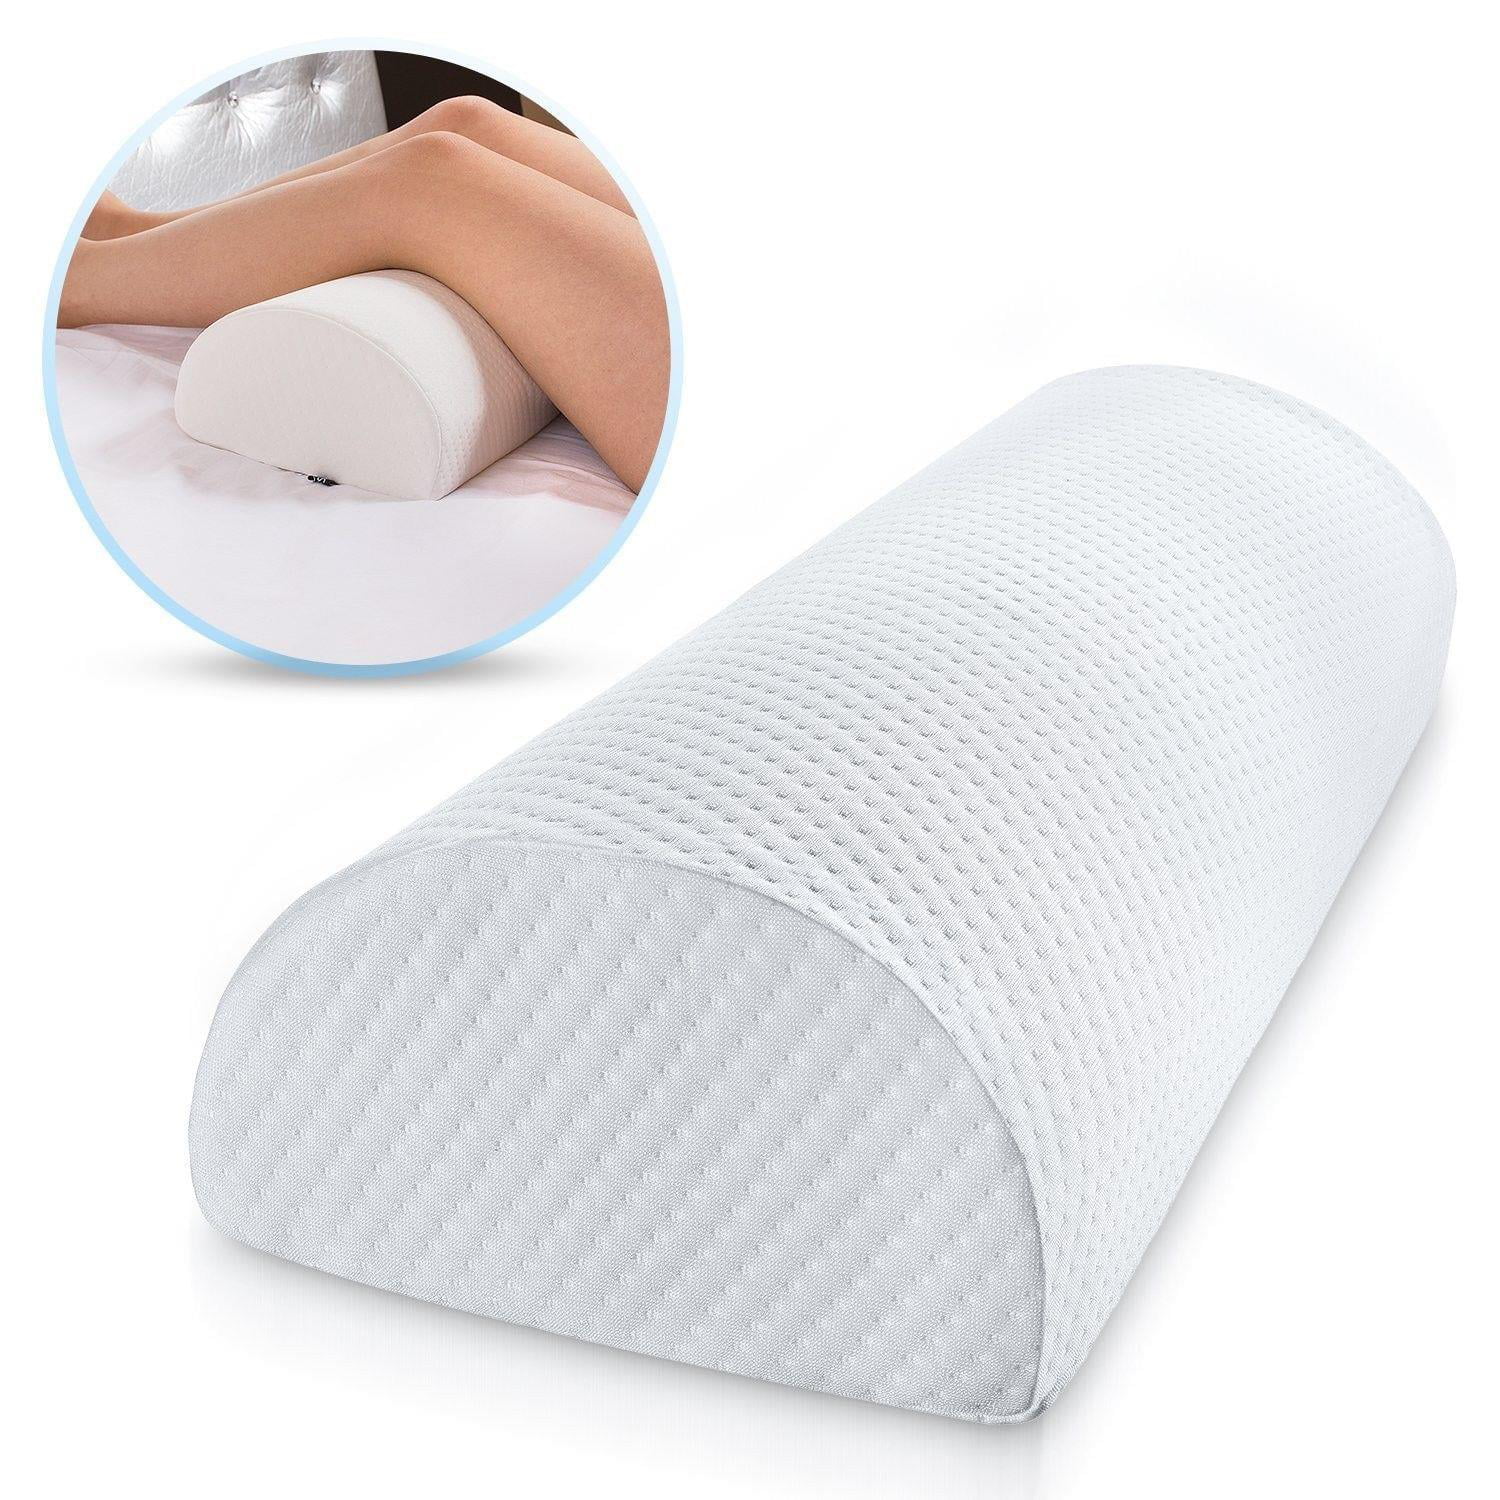 Four Position Support Pillow With Bamboo Derived Rayon And Polyester Cover Removable Foam For Perfect Fit For Back Neck Knee Ankle Coop Home Goods Adjustable Memory Foam